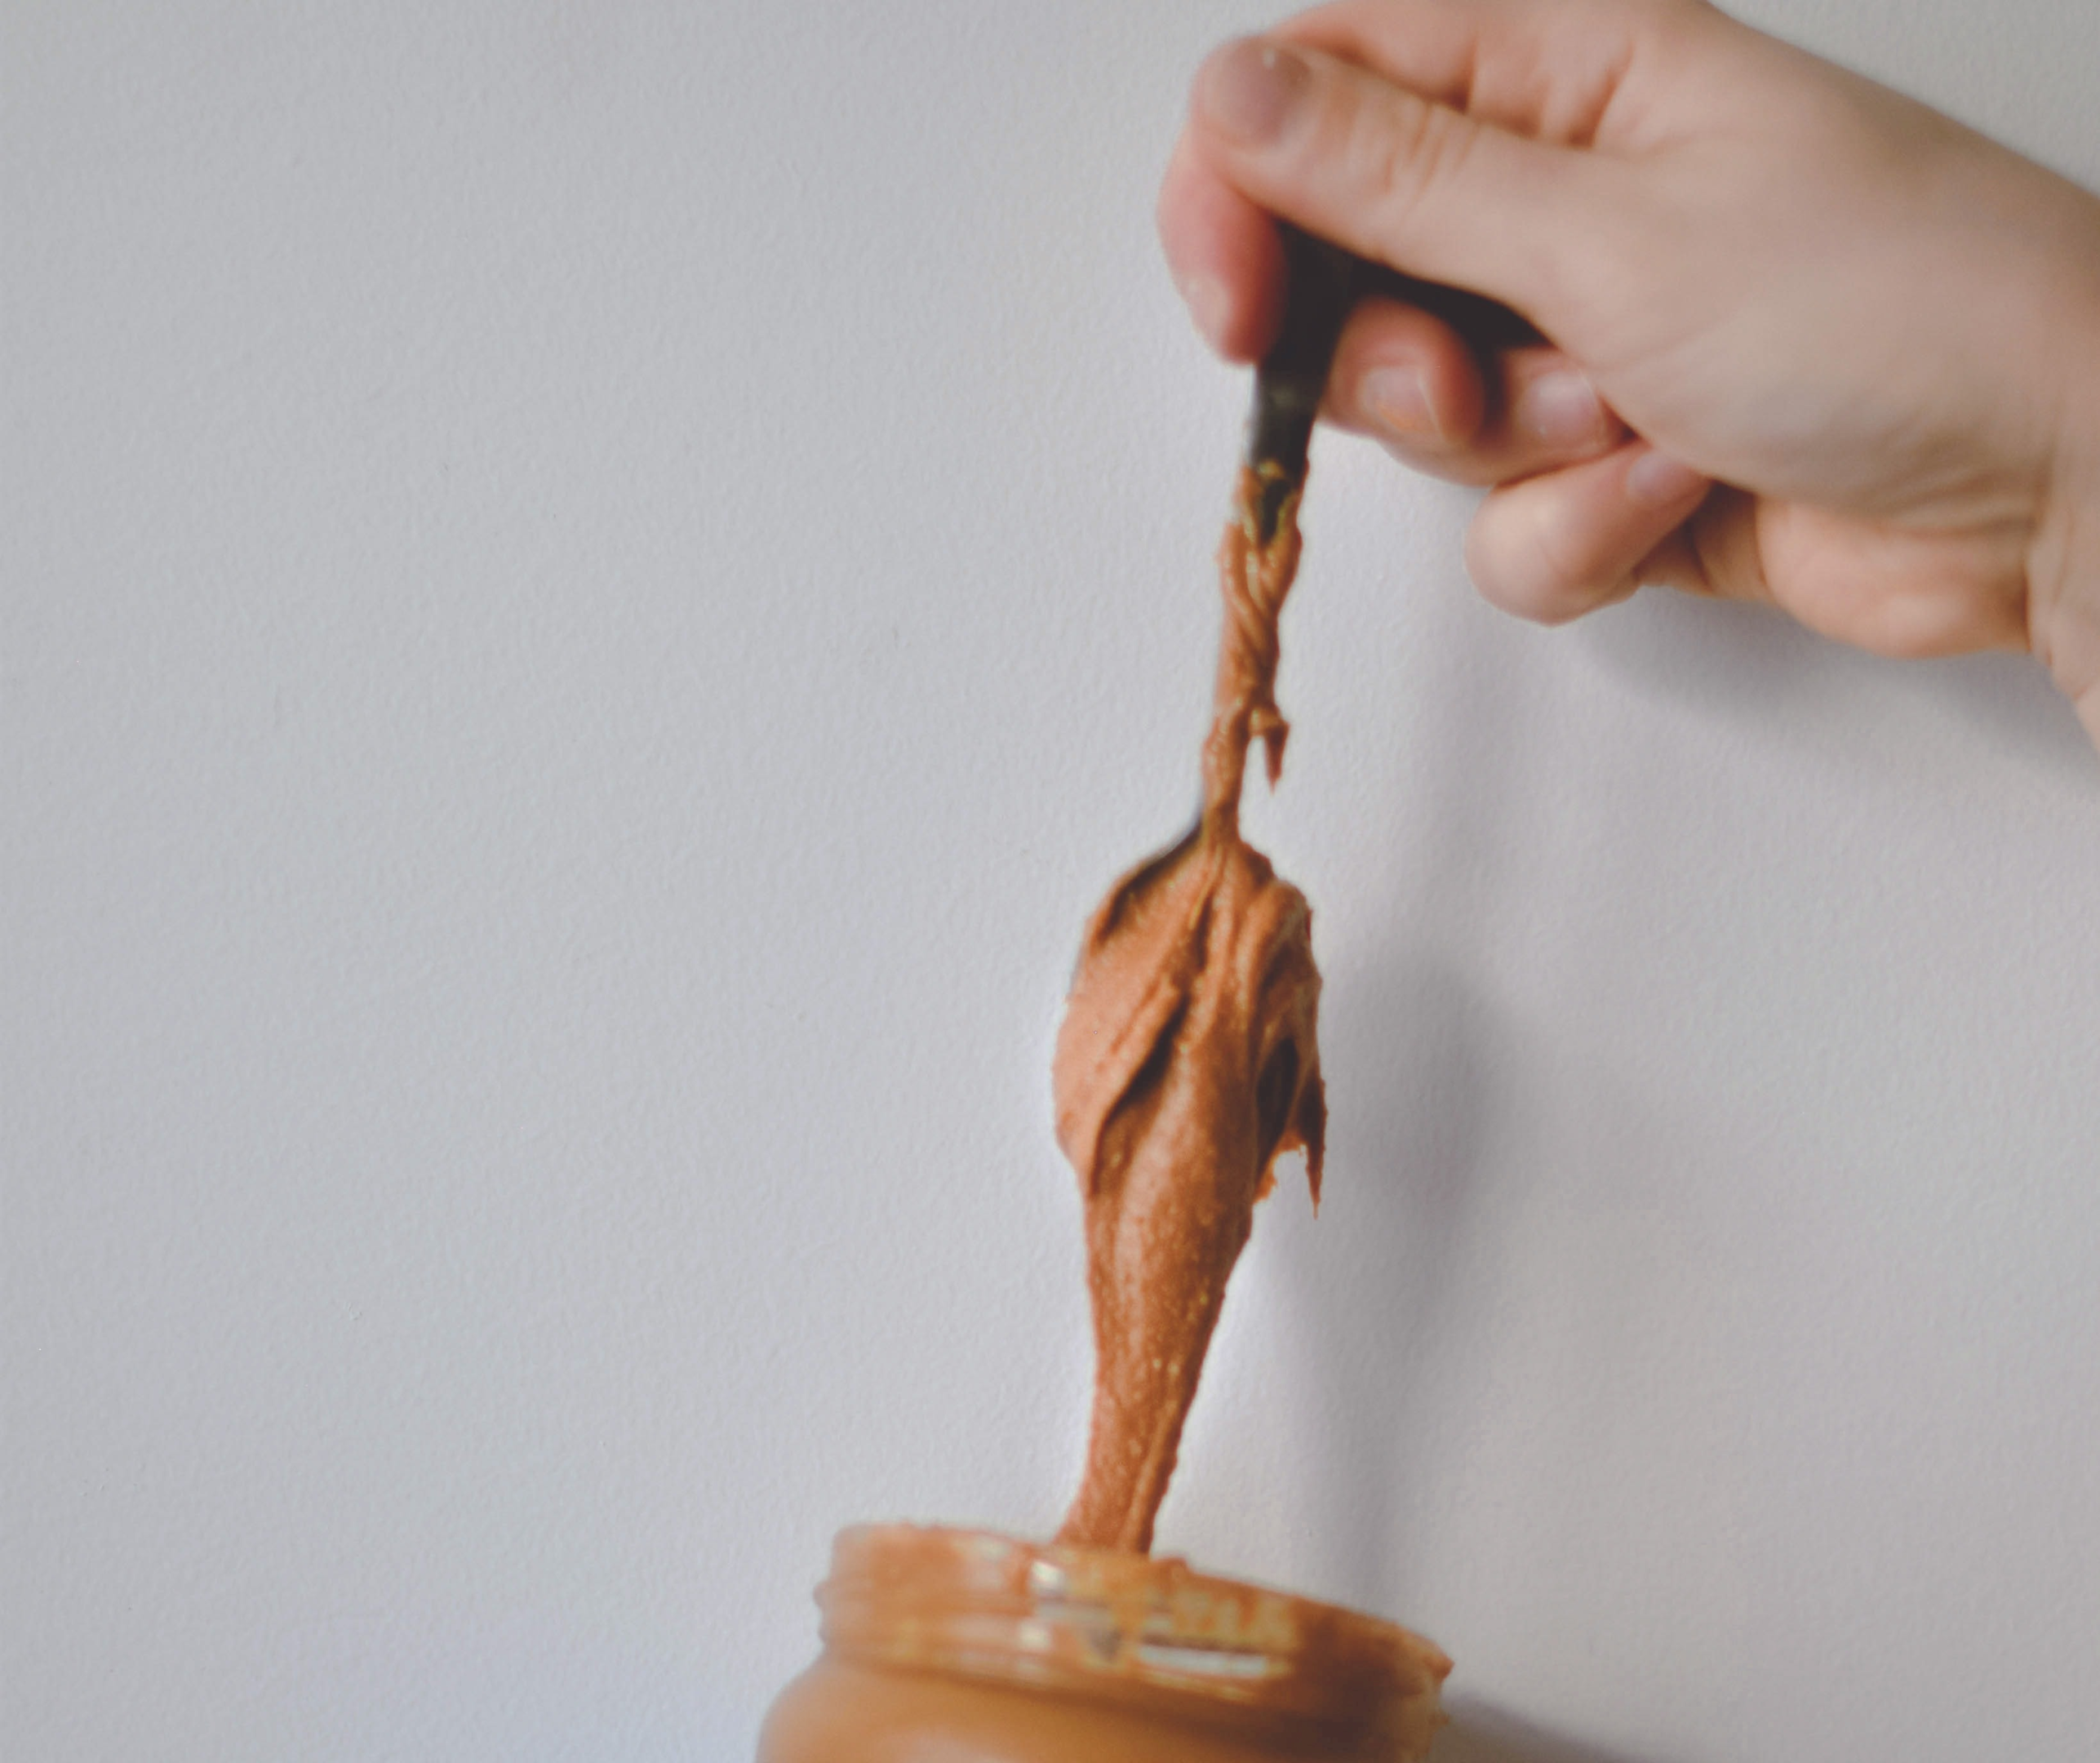 A close-up picture of a person's hand pulling out peanut butter with a spoon.